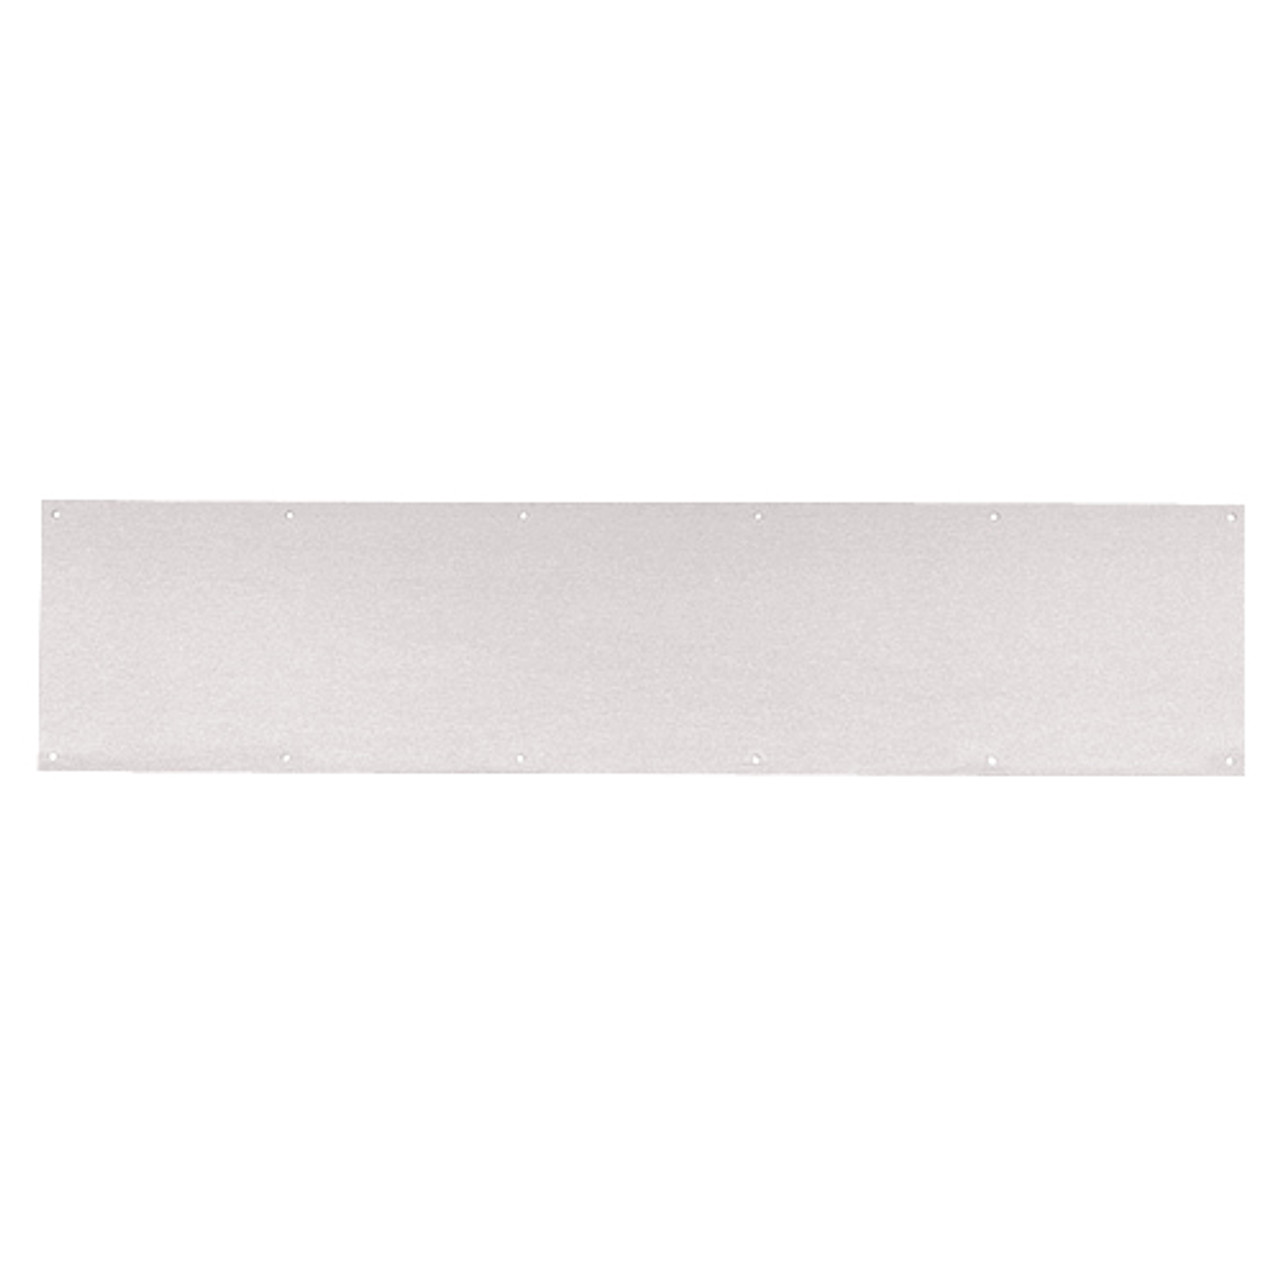 8400-US32-8x34-B-CS Ives 8400 Series Protection Plate in Bright Stainless Steel